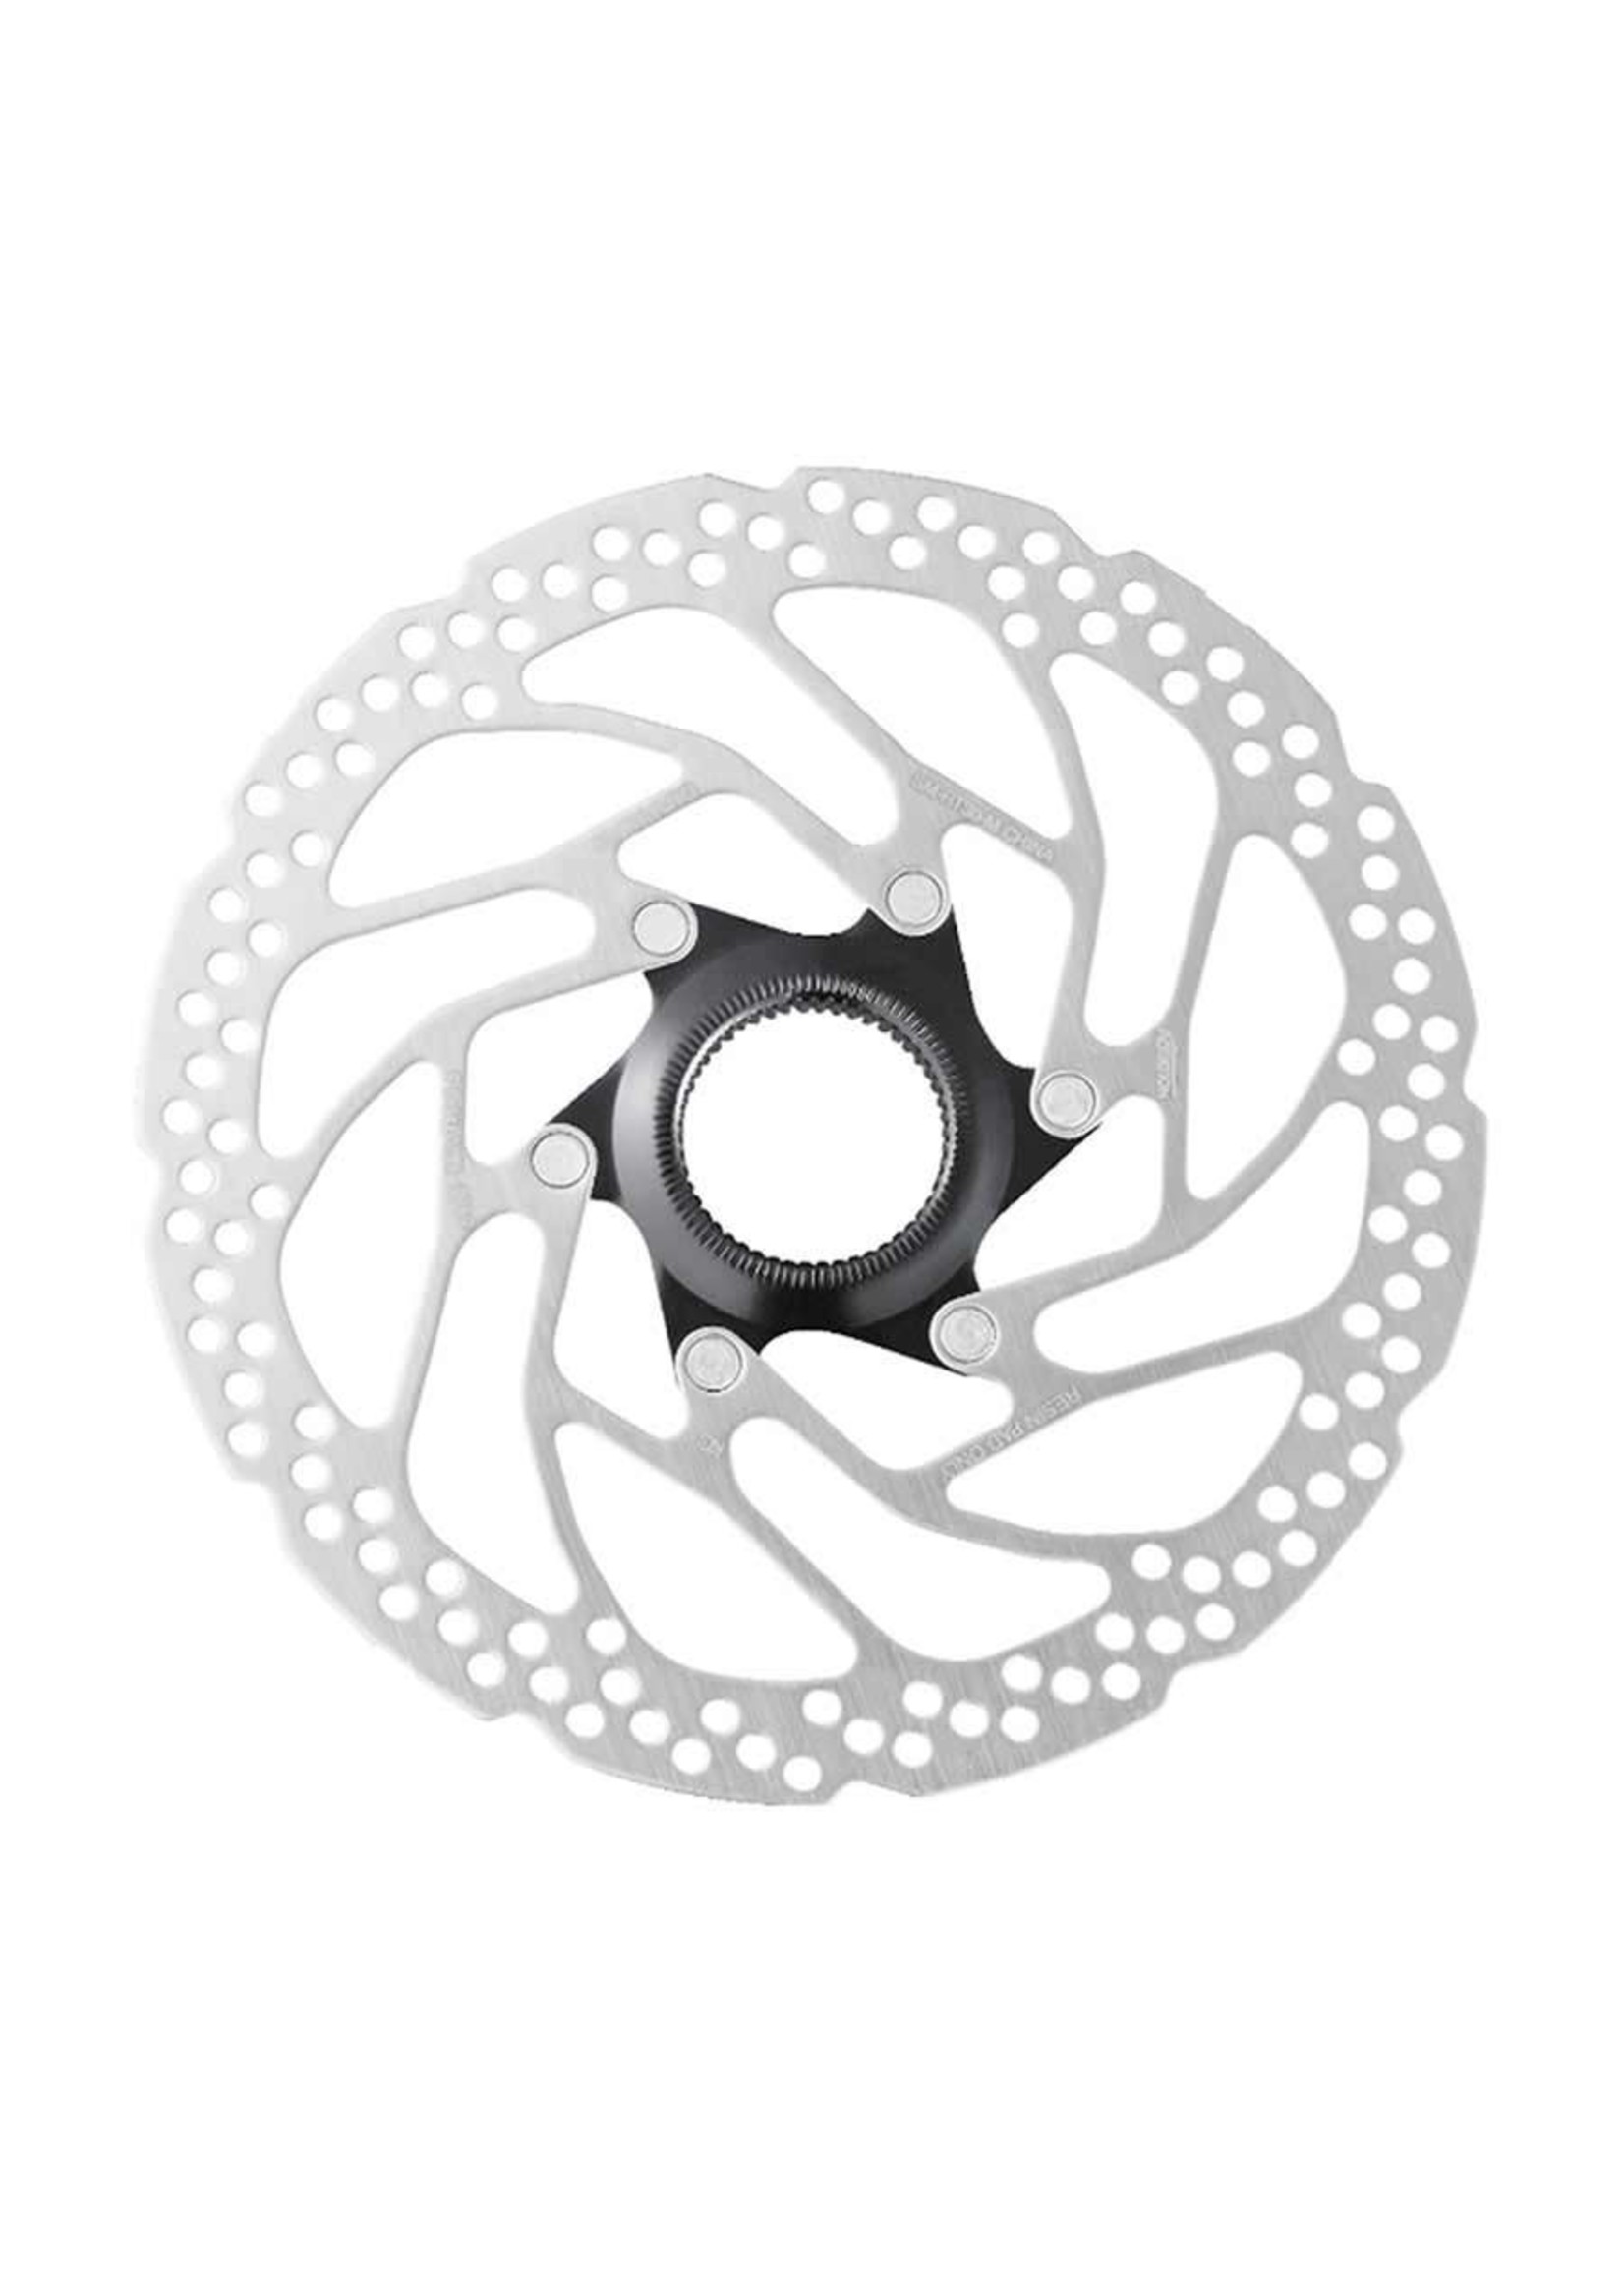 Shimano ROTOR FOR DISC BRAKE, BAD DATA-SIC WILL RESEND